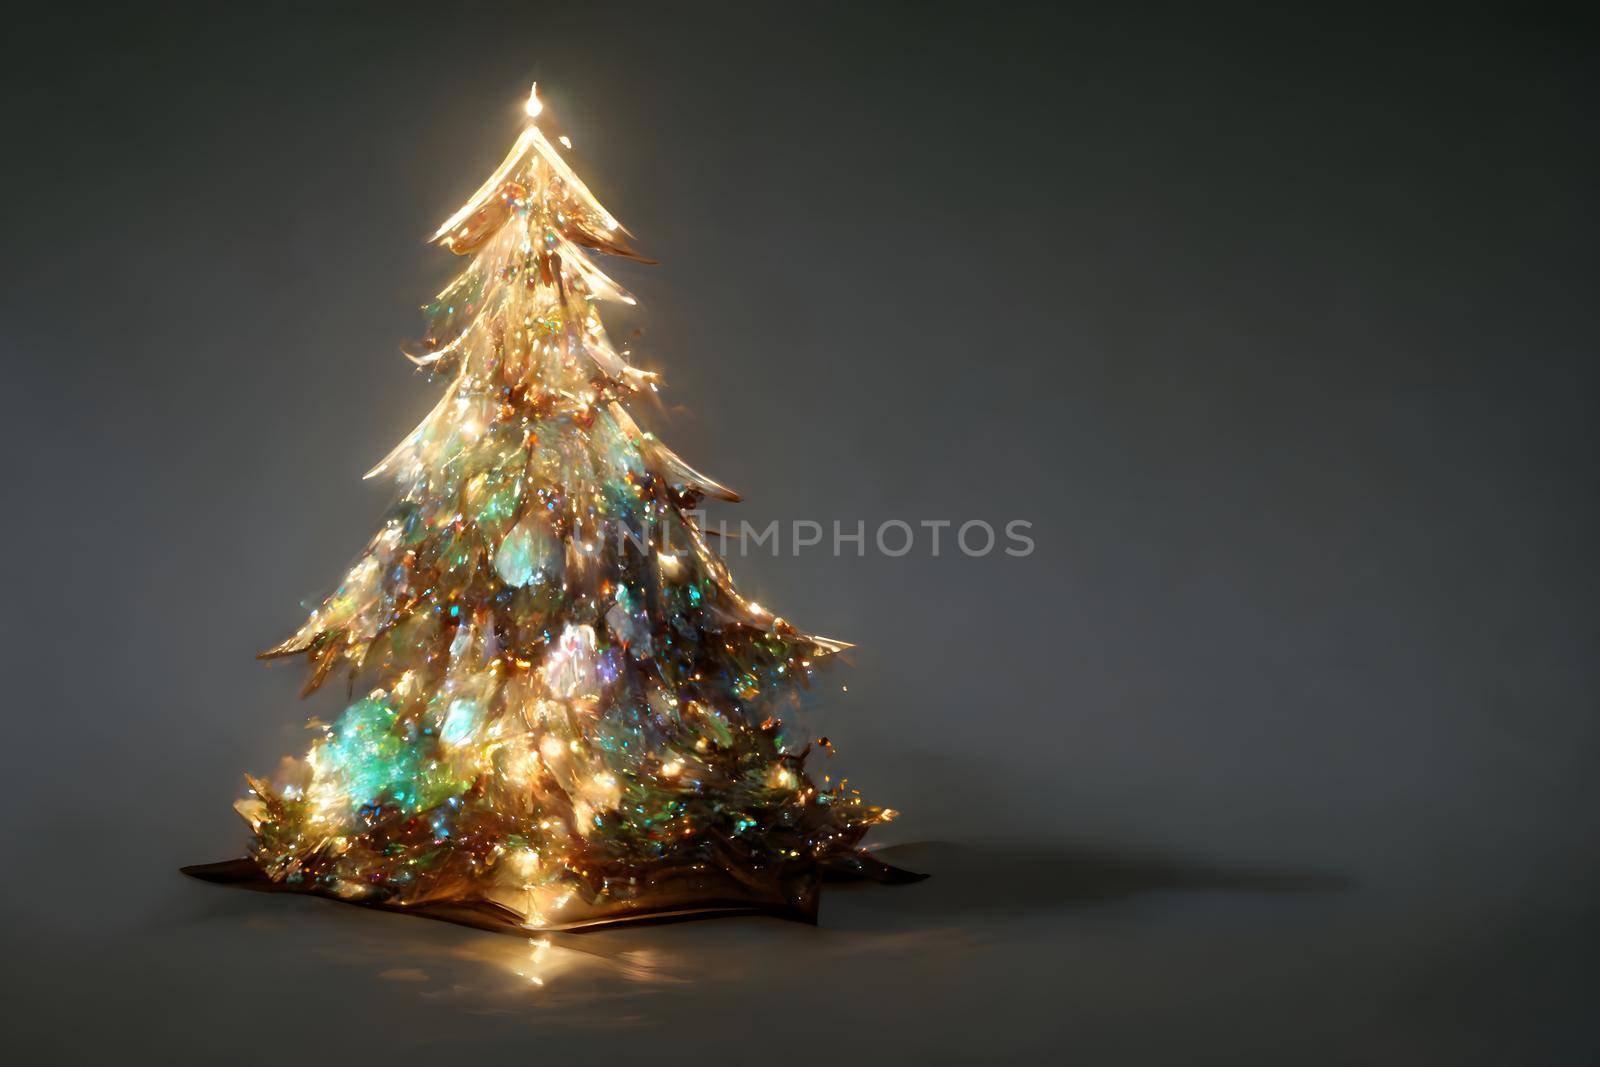 christmas tree on gray backgound with copy space, neural network generated art. Digitally generated image. Not based on any actual scene or pattern.